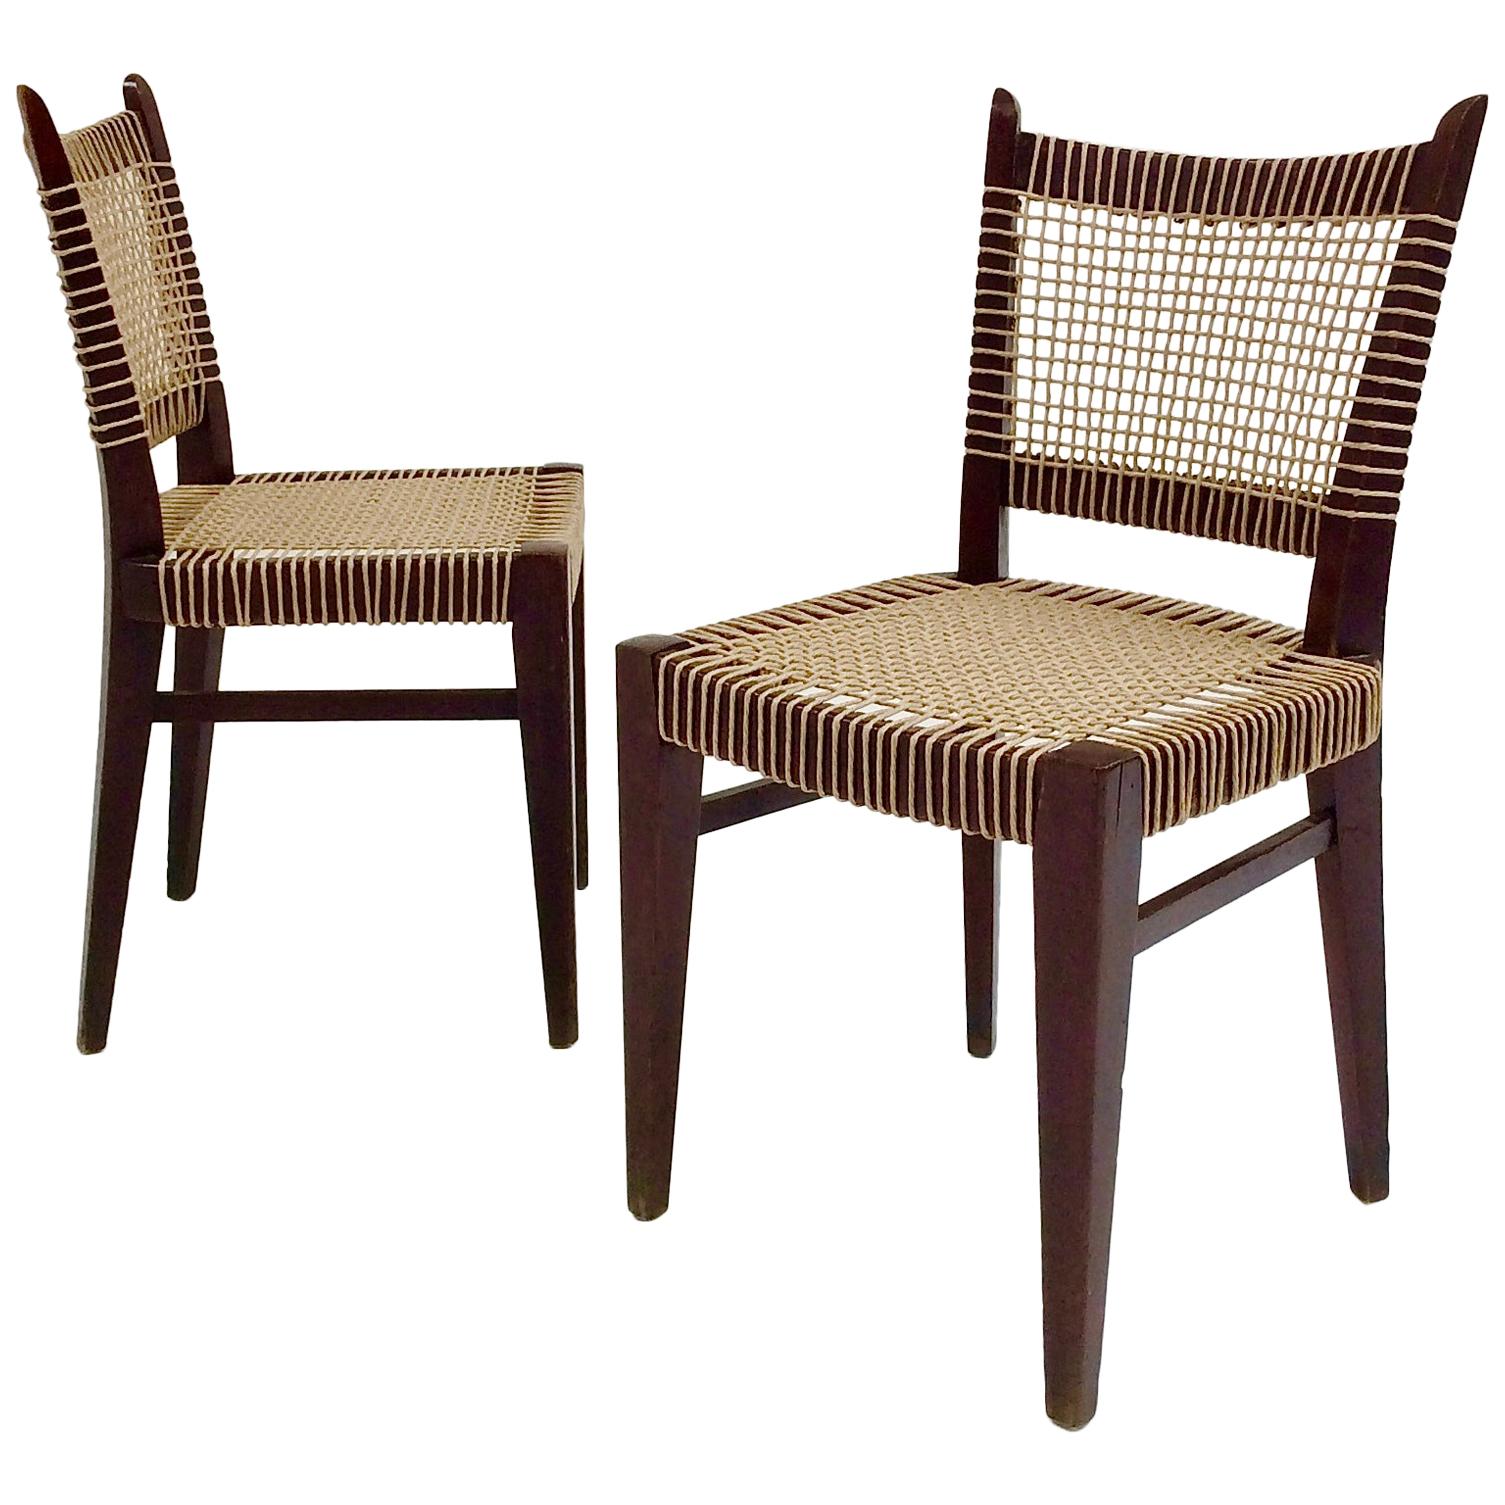 Pair of Midcentury Straw and Wood Chairs, circa 1950, France